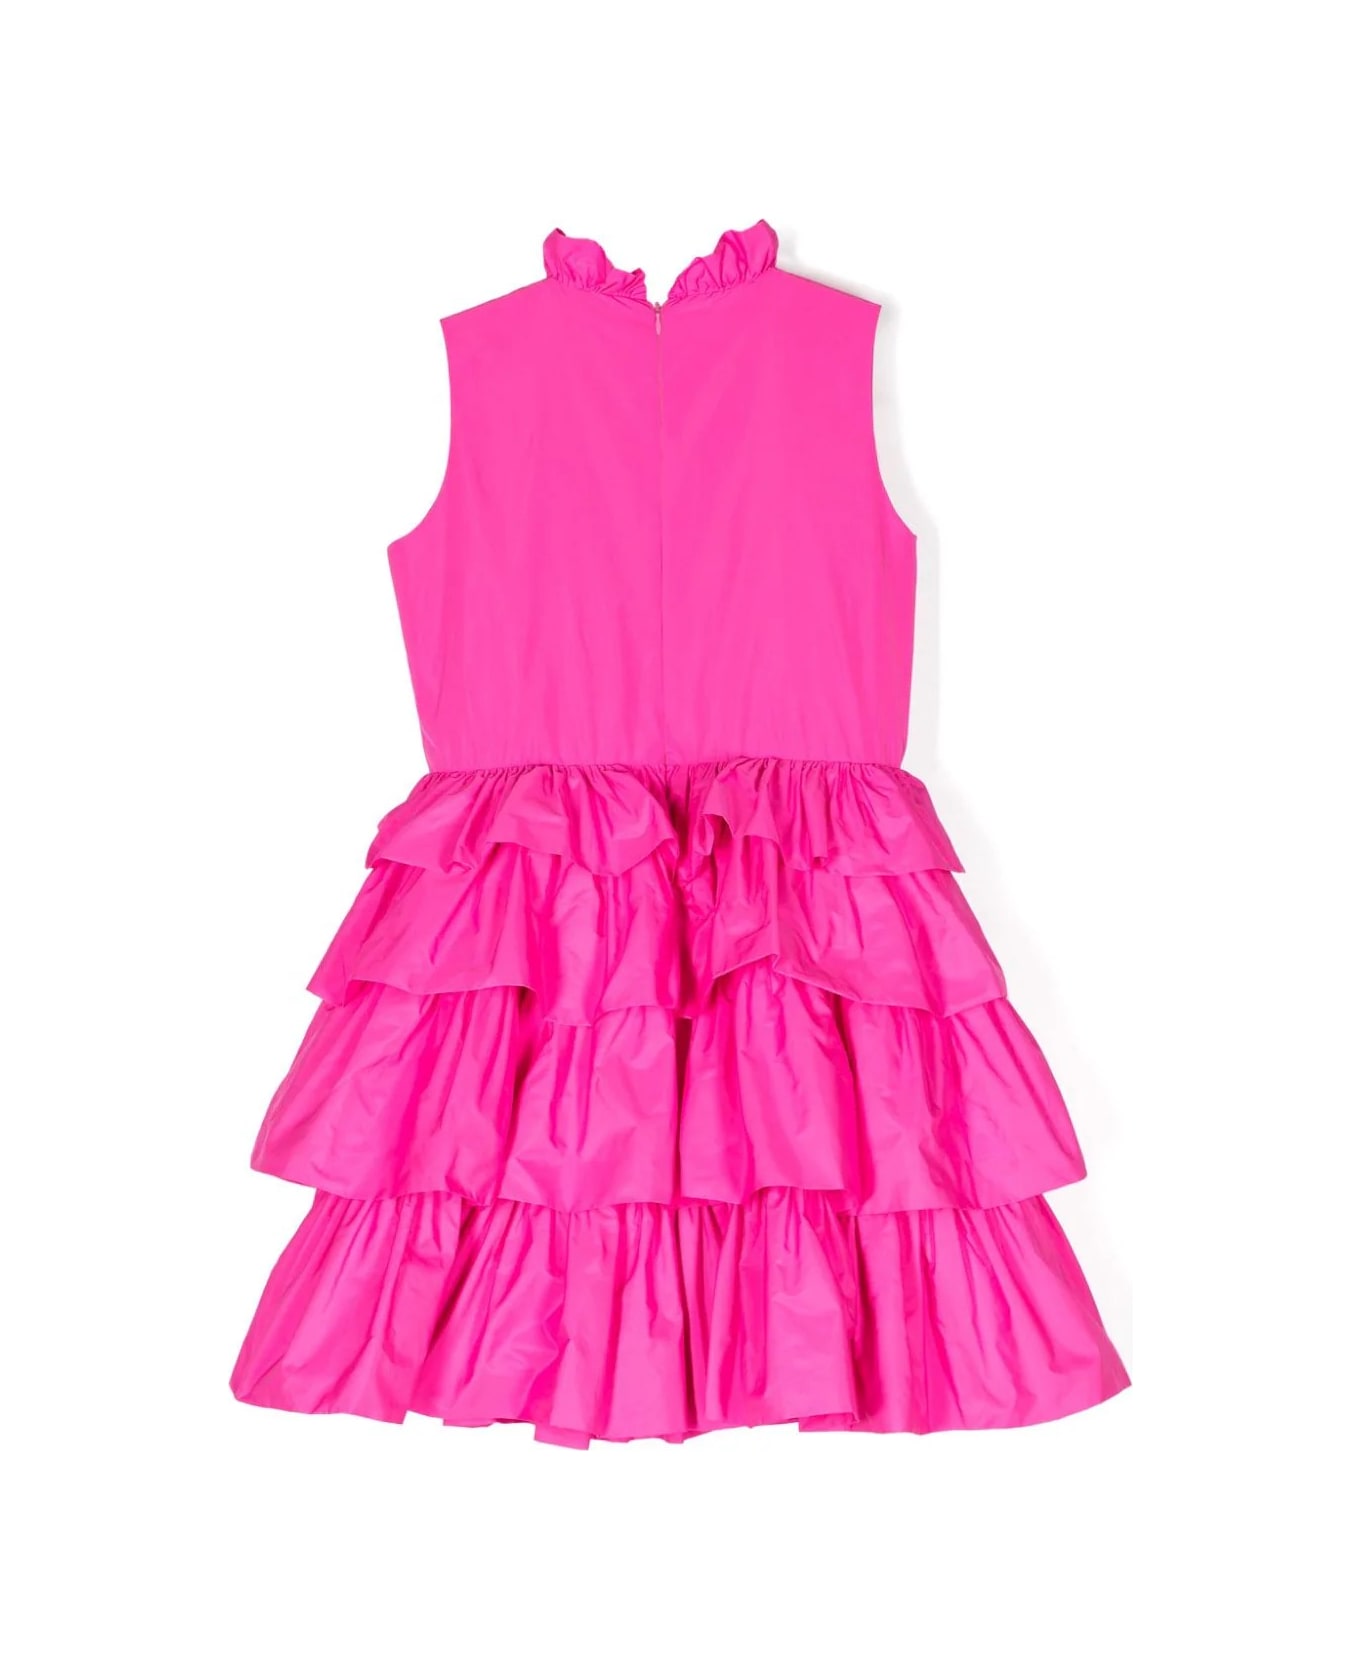 Miss Blumarine Fuchsia Dress With Ruches And Flounces - Pink